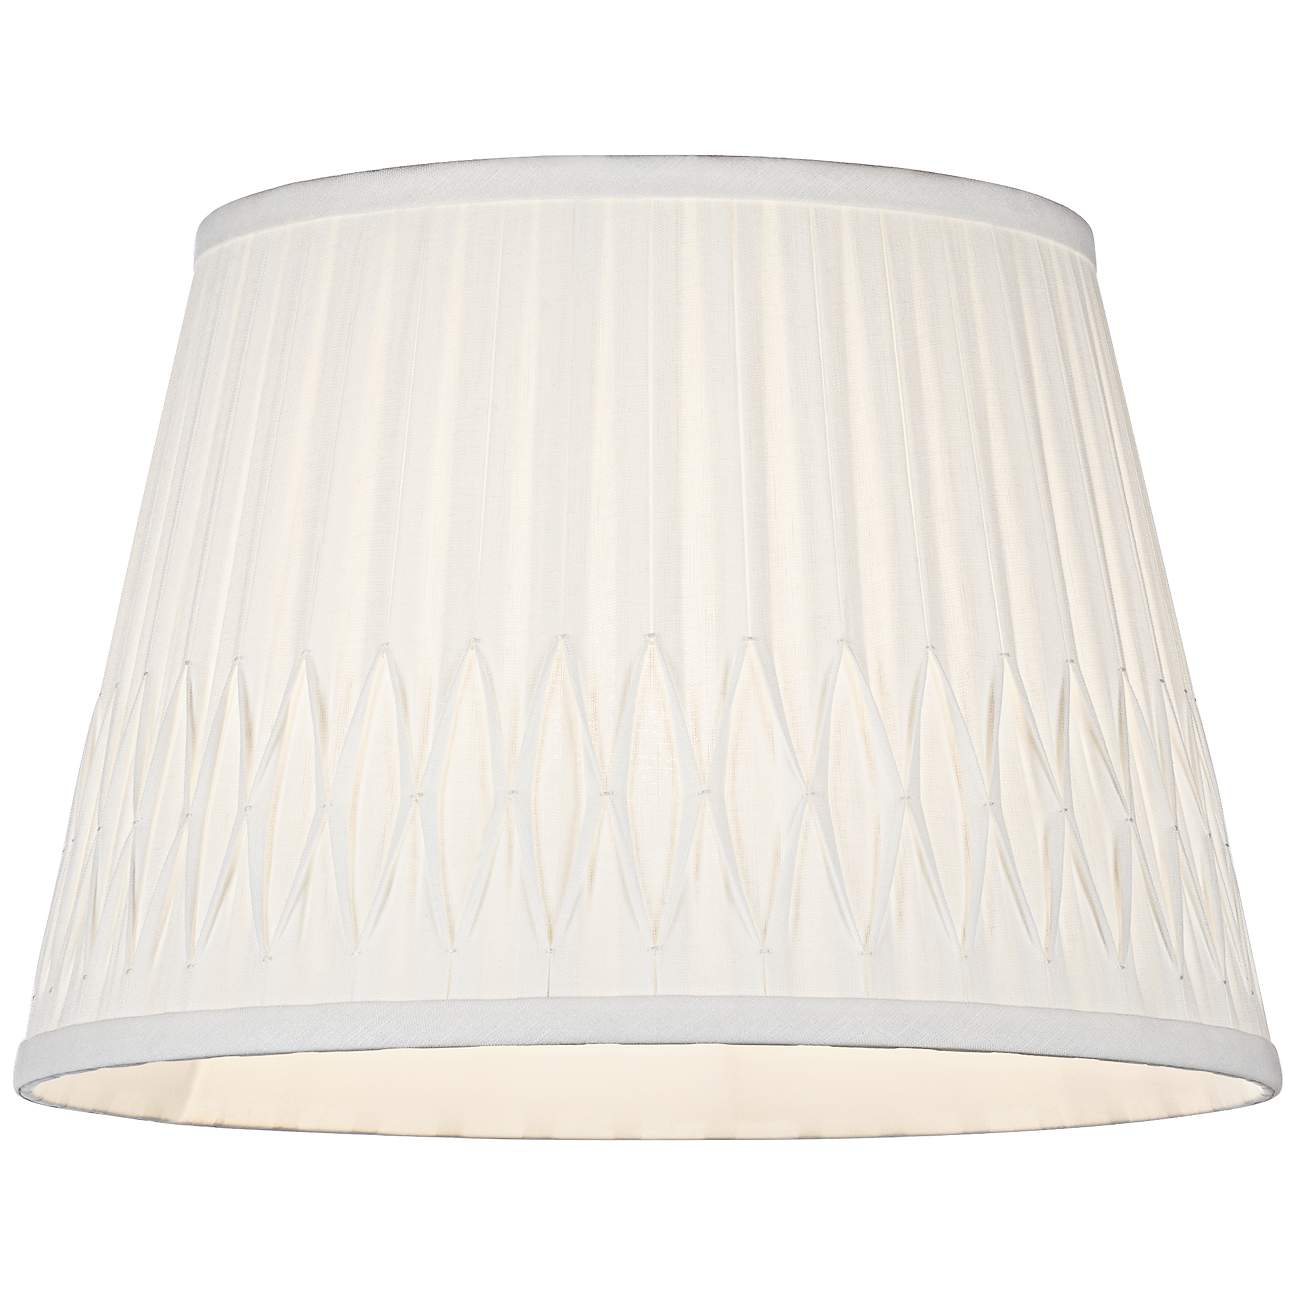 Off-White Bottom Smocked Linen Shade 10x14x10 (Spider) - #5Y476 | Lamps ...